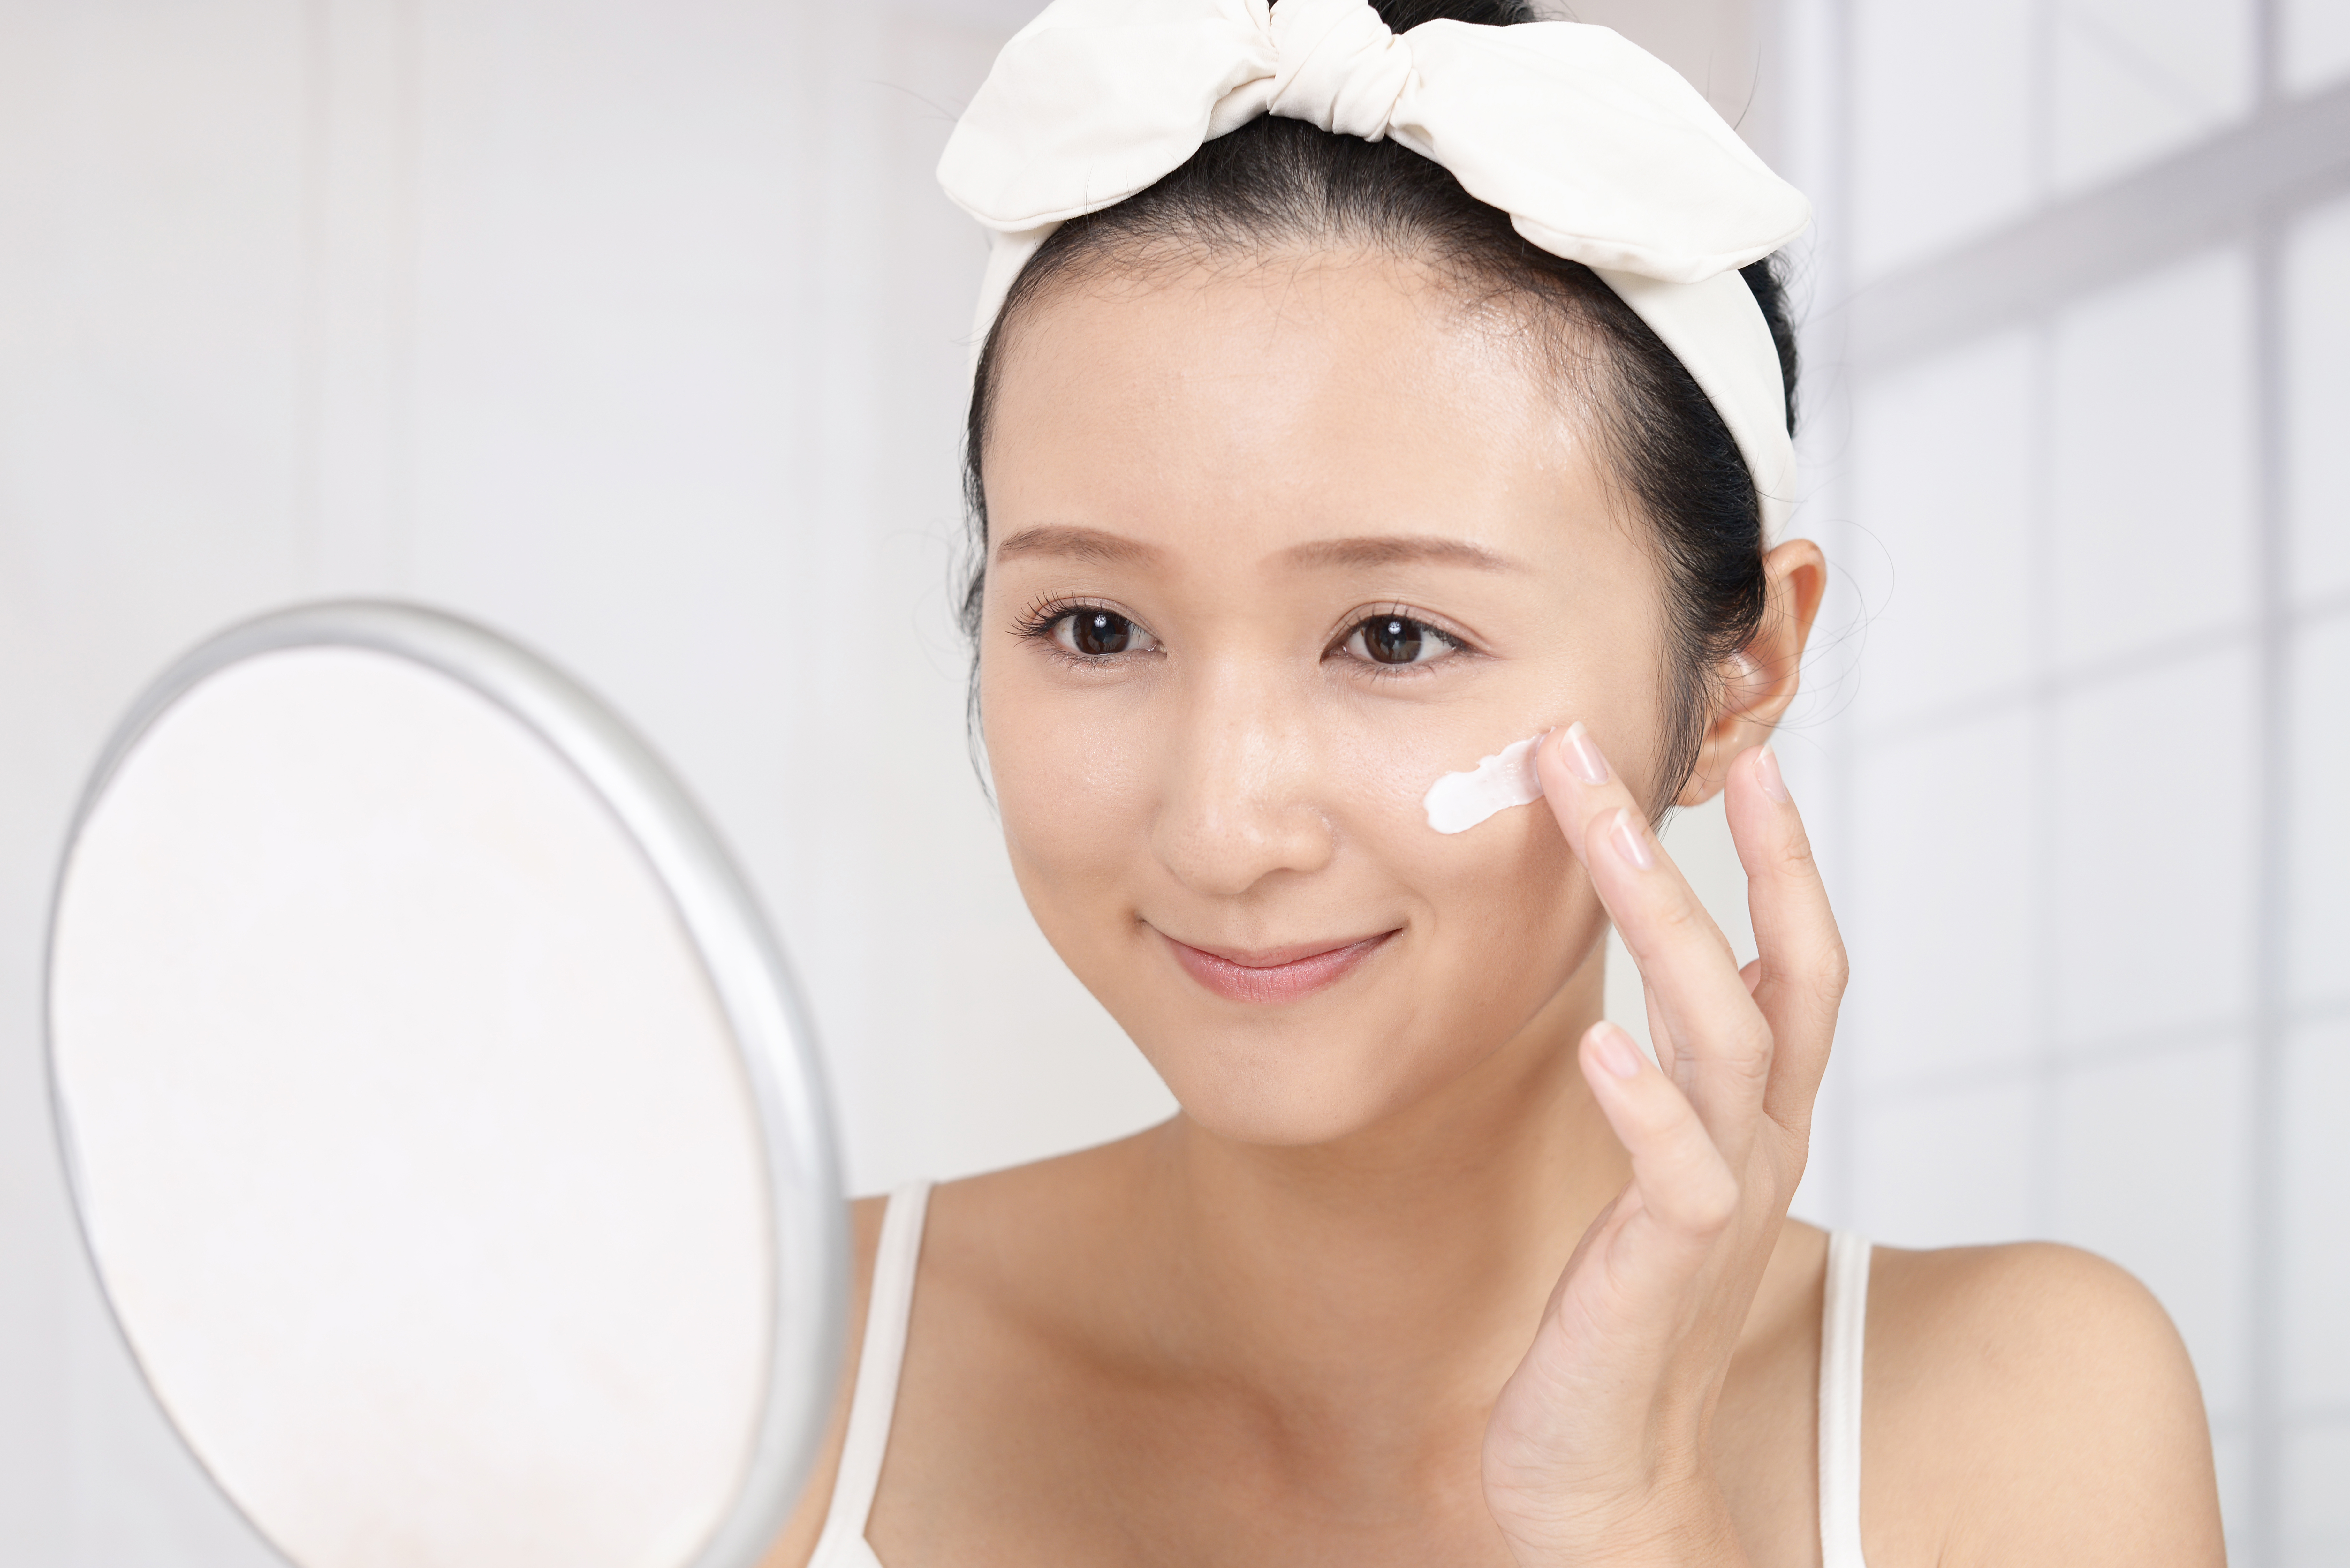 China Online Cosmetics Market Overview – China Internet Watch